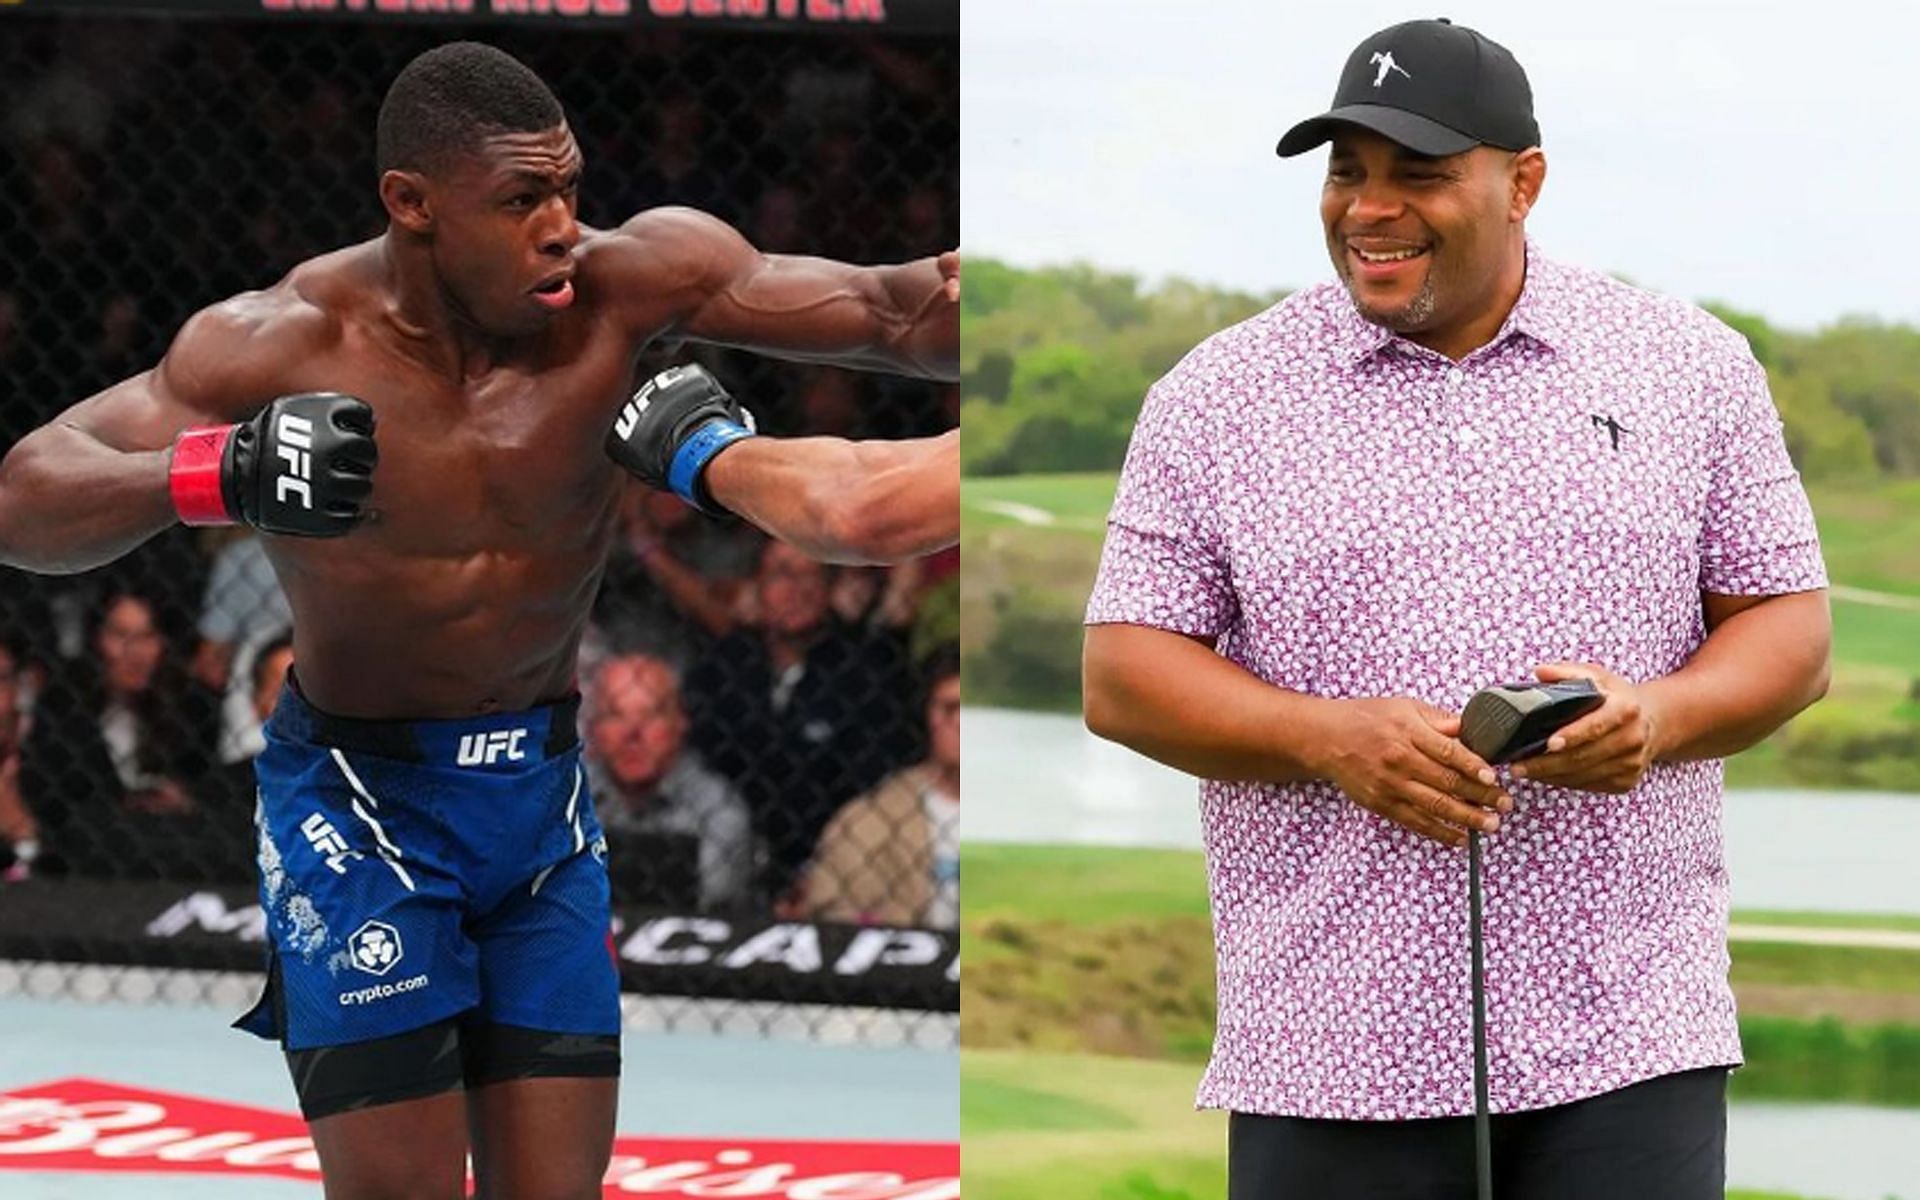 Joaquim Buckley (left) and Daniel Cormier (right) were engaged in a furious social media altercation [Images Courtesy: @dc_mma and @ufc Instagram]